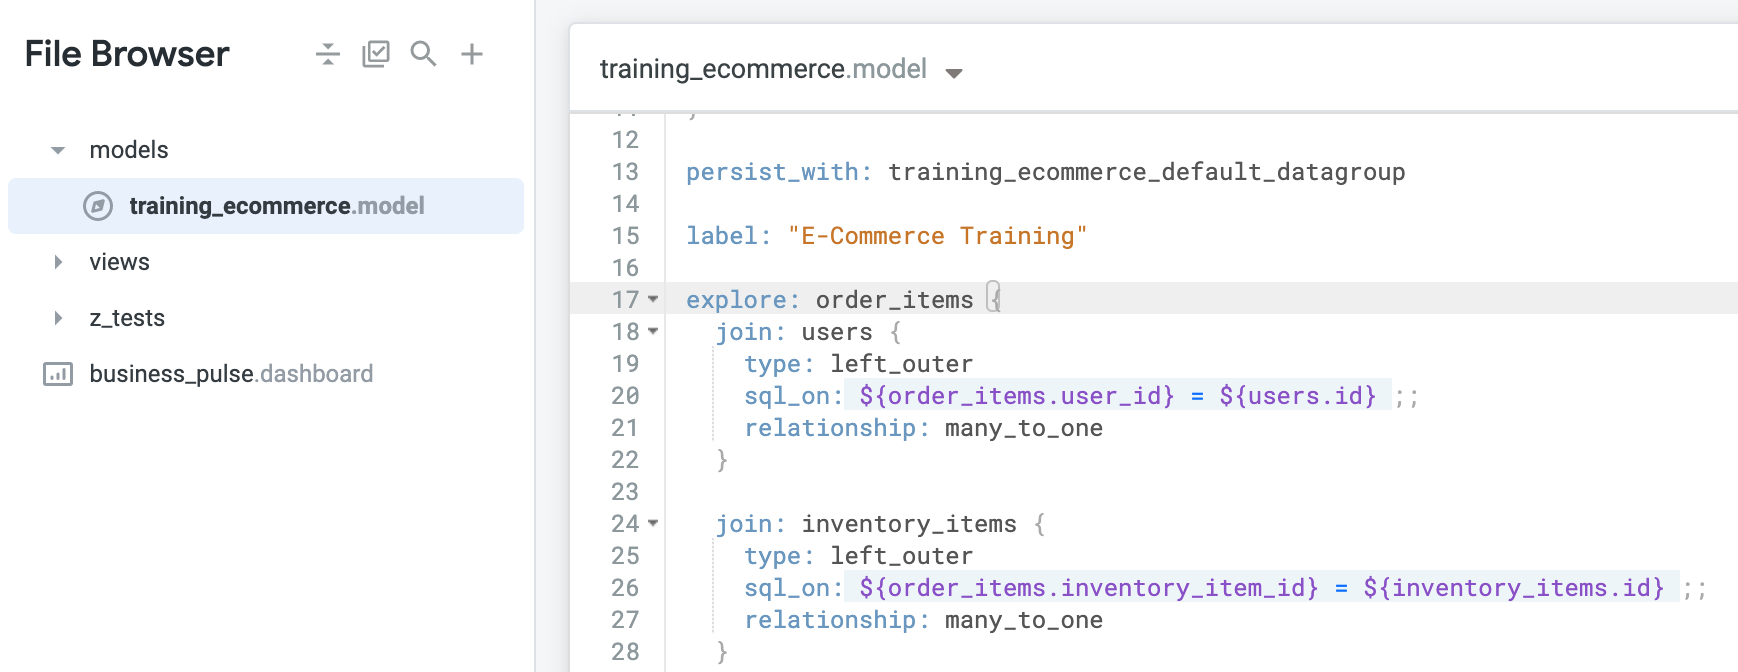 The training_ecommerce.model displaying lines 14 to 28